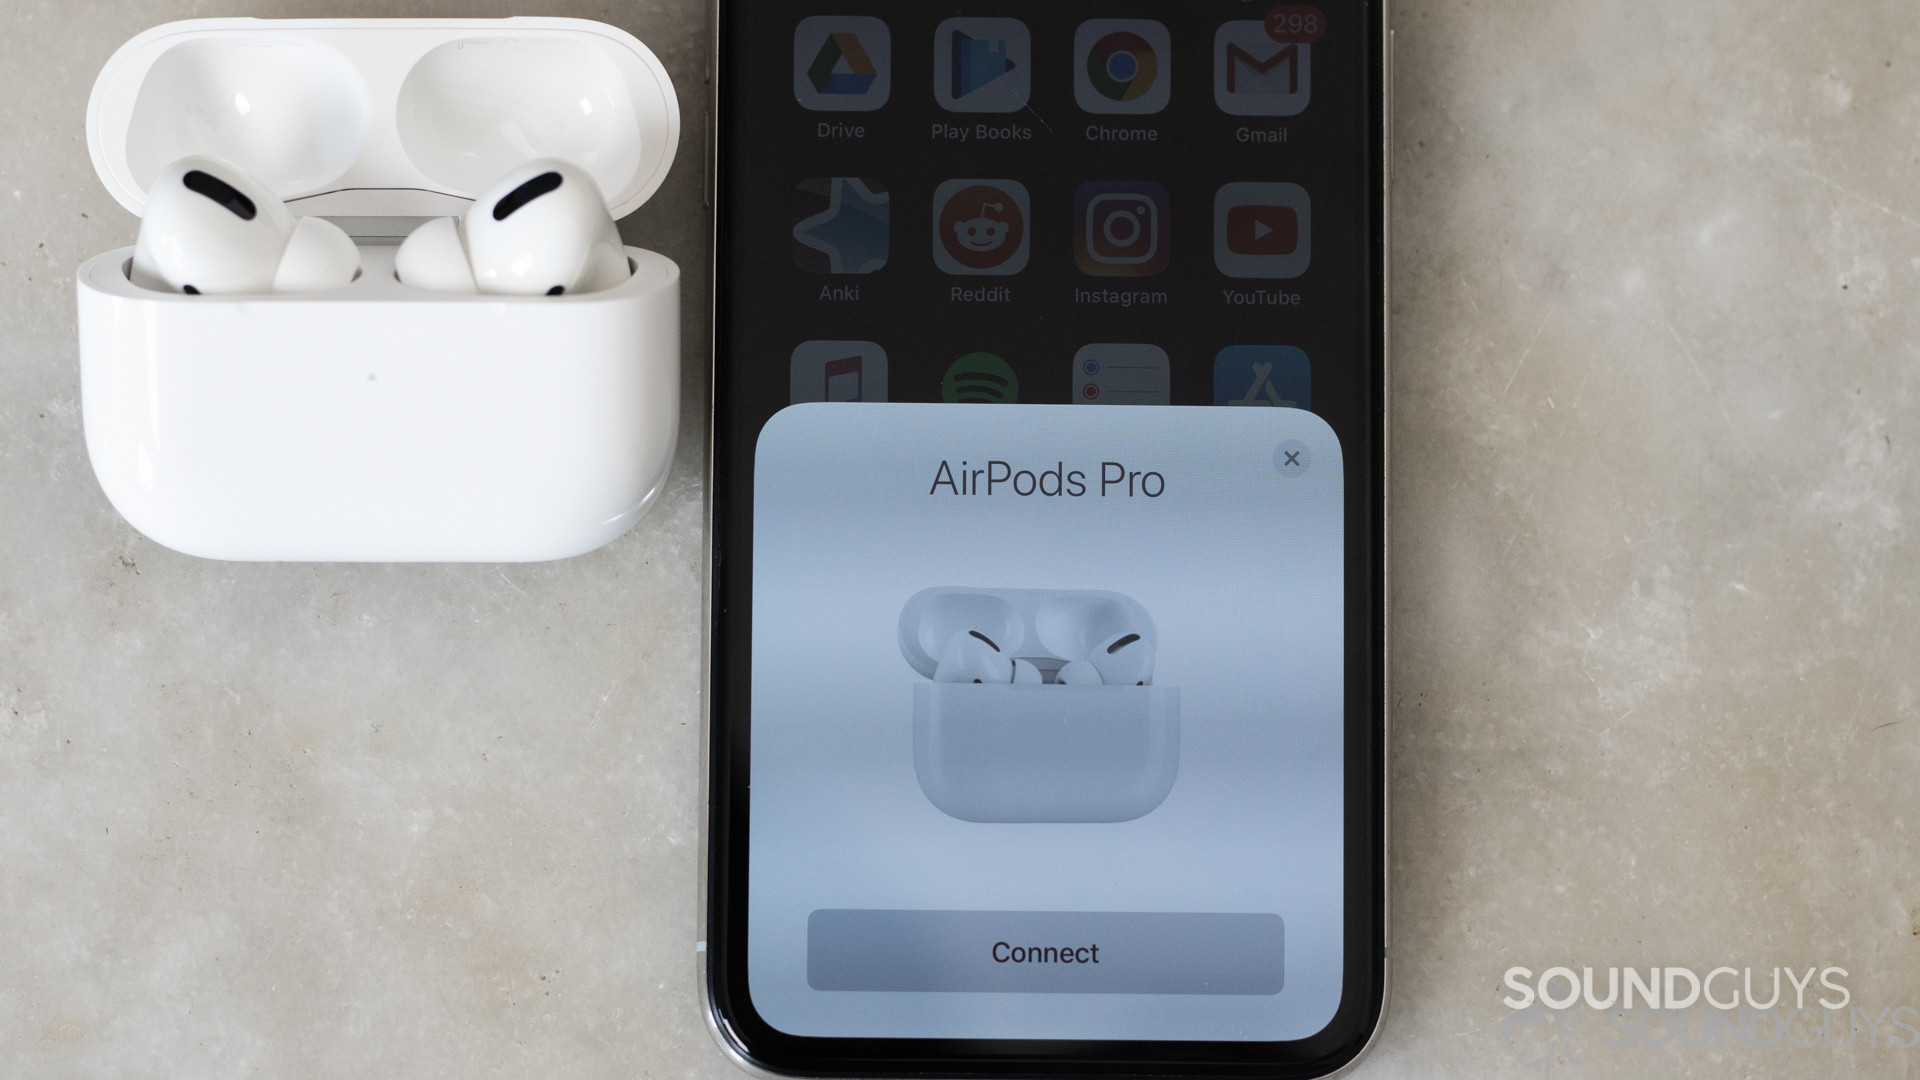 How to connect AirPods: iPhone, iPad, Mac, PC, and more - SoundGuys